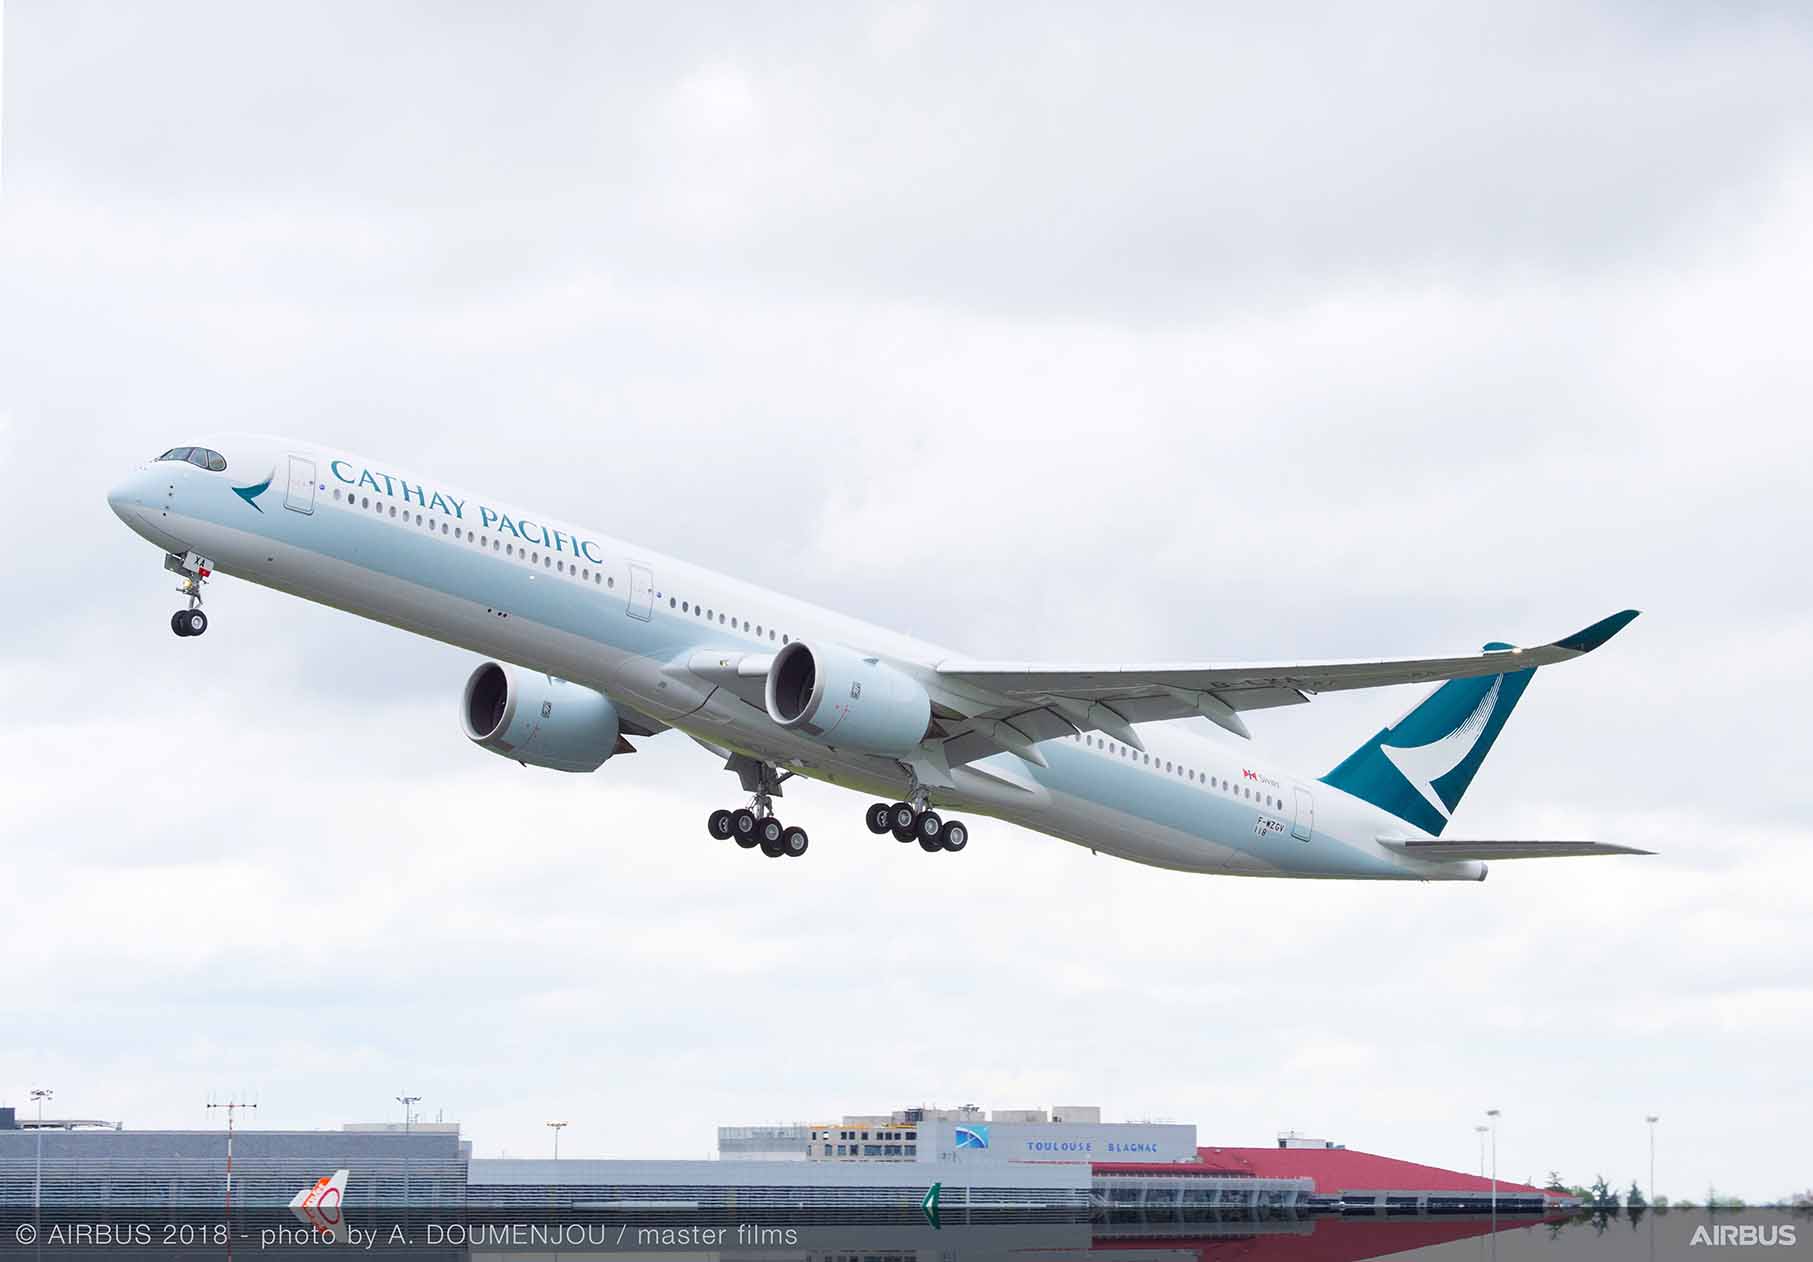 Cathay Pacific chairman steps down amid Hong Kong protest fallout